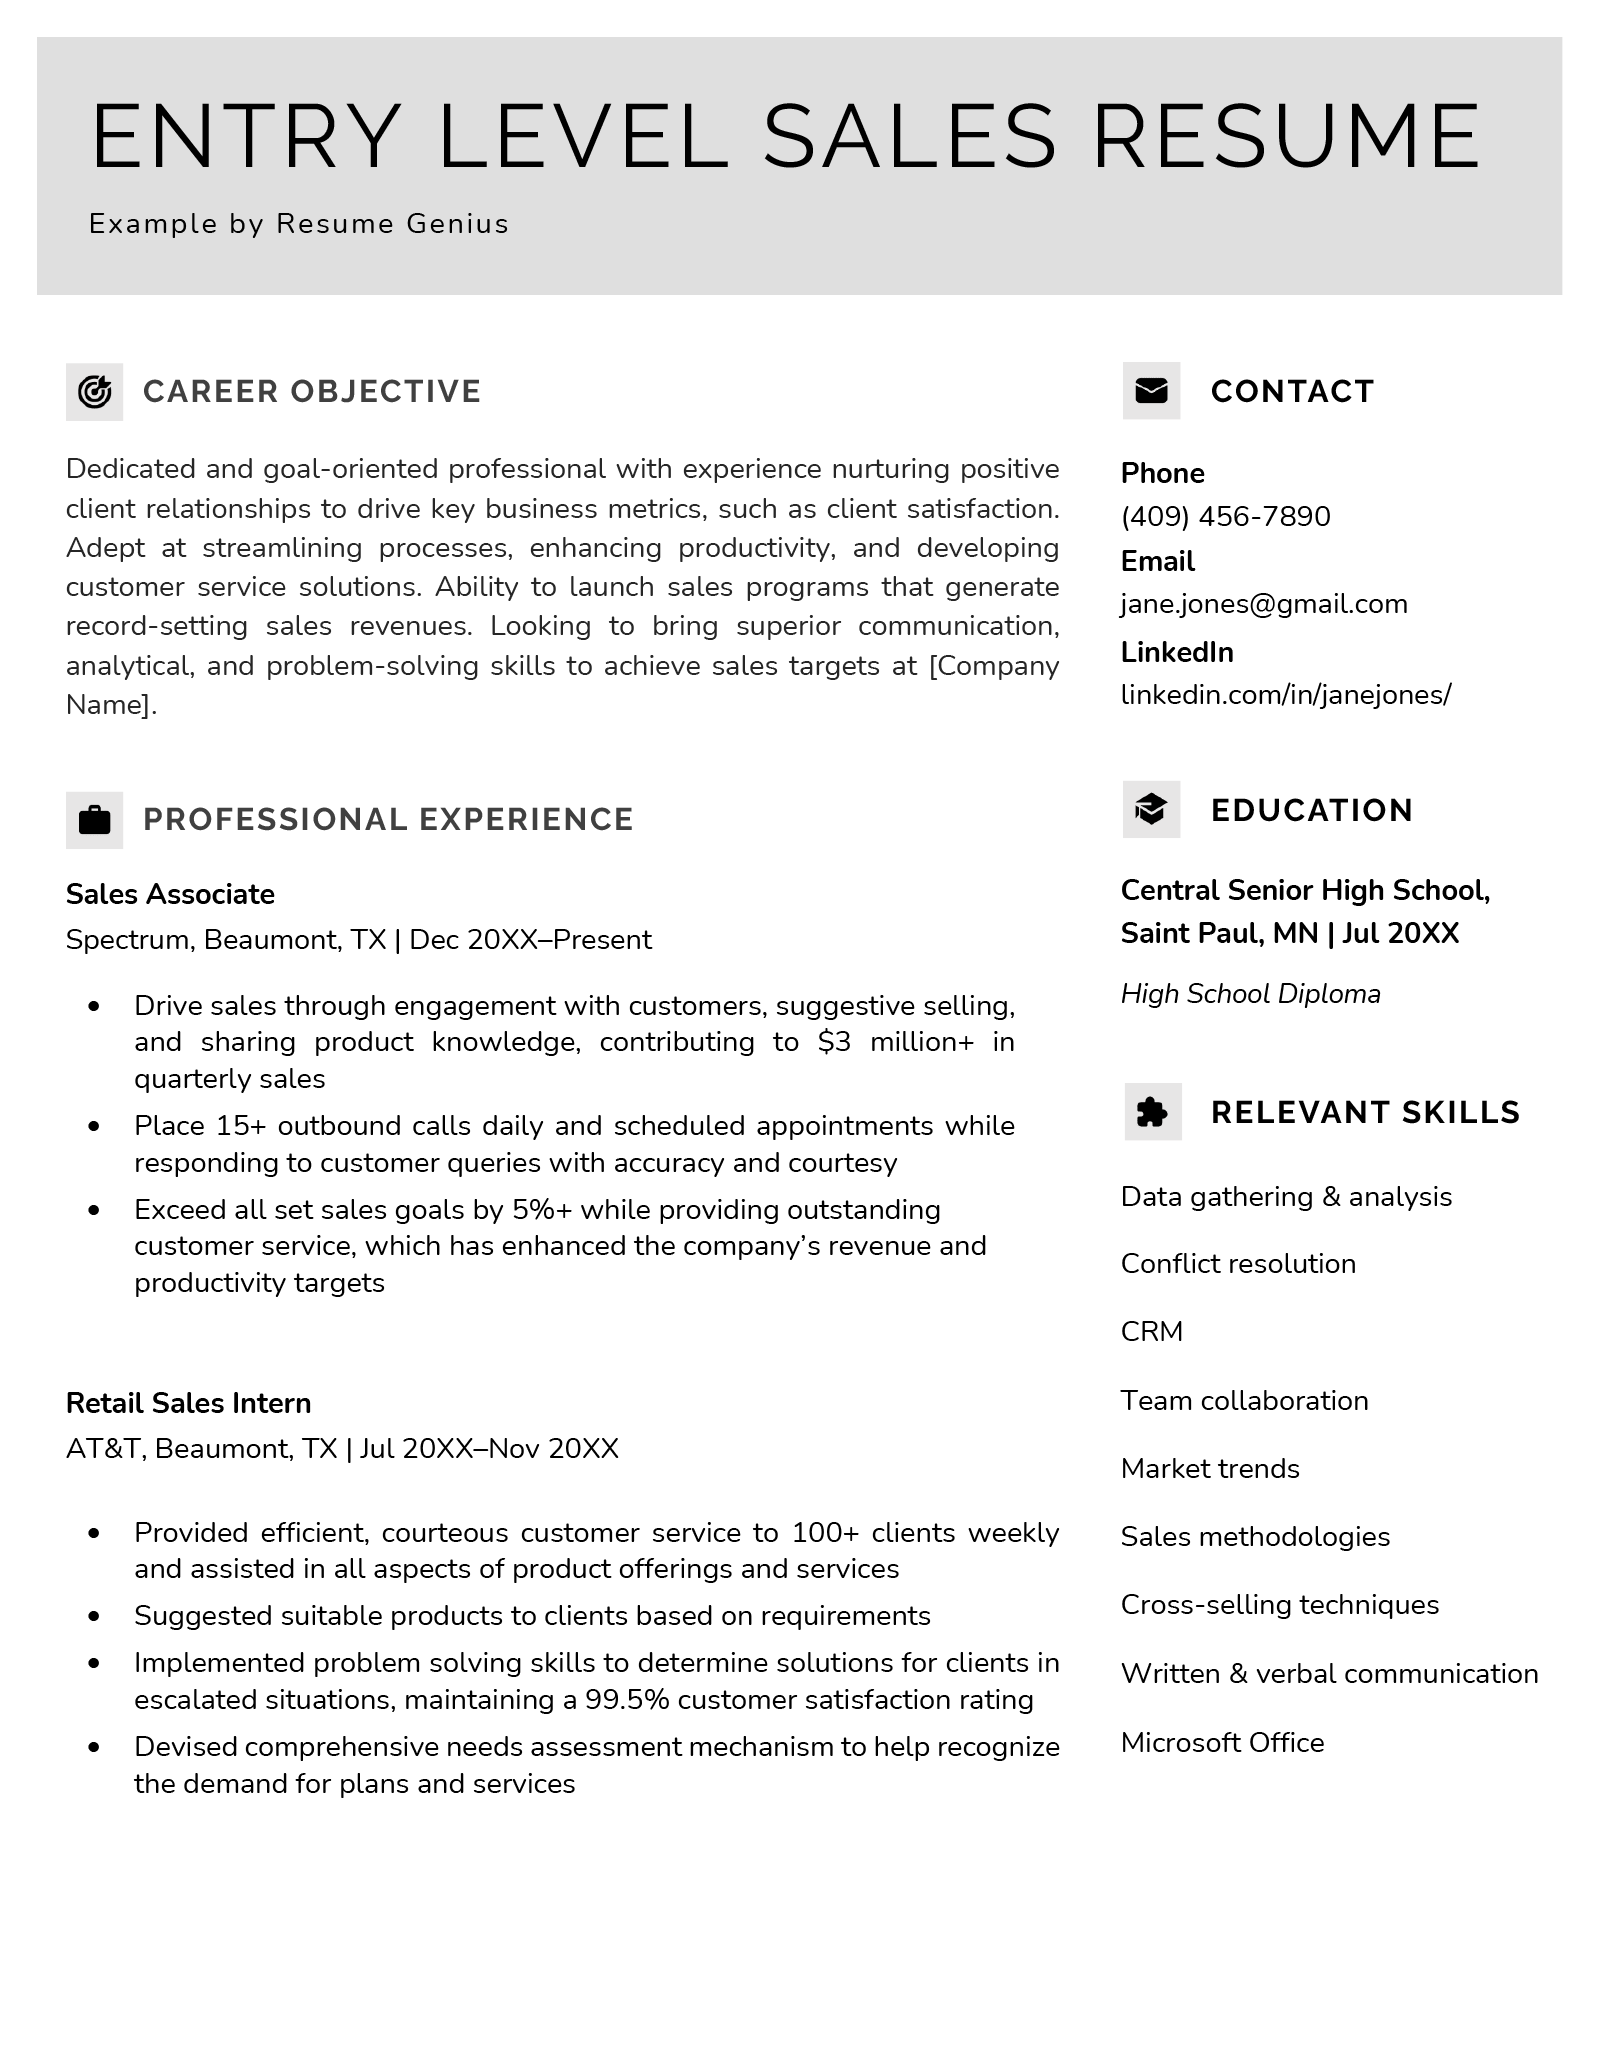 An entry level sales resume example with a gray header and sections for the applicant's career objective, professional experience, contact information, education, and relevant skills